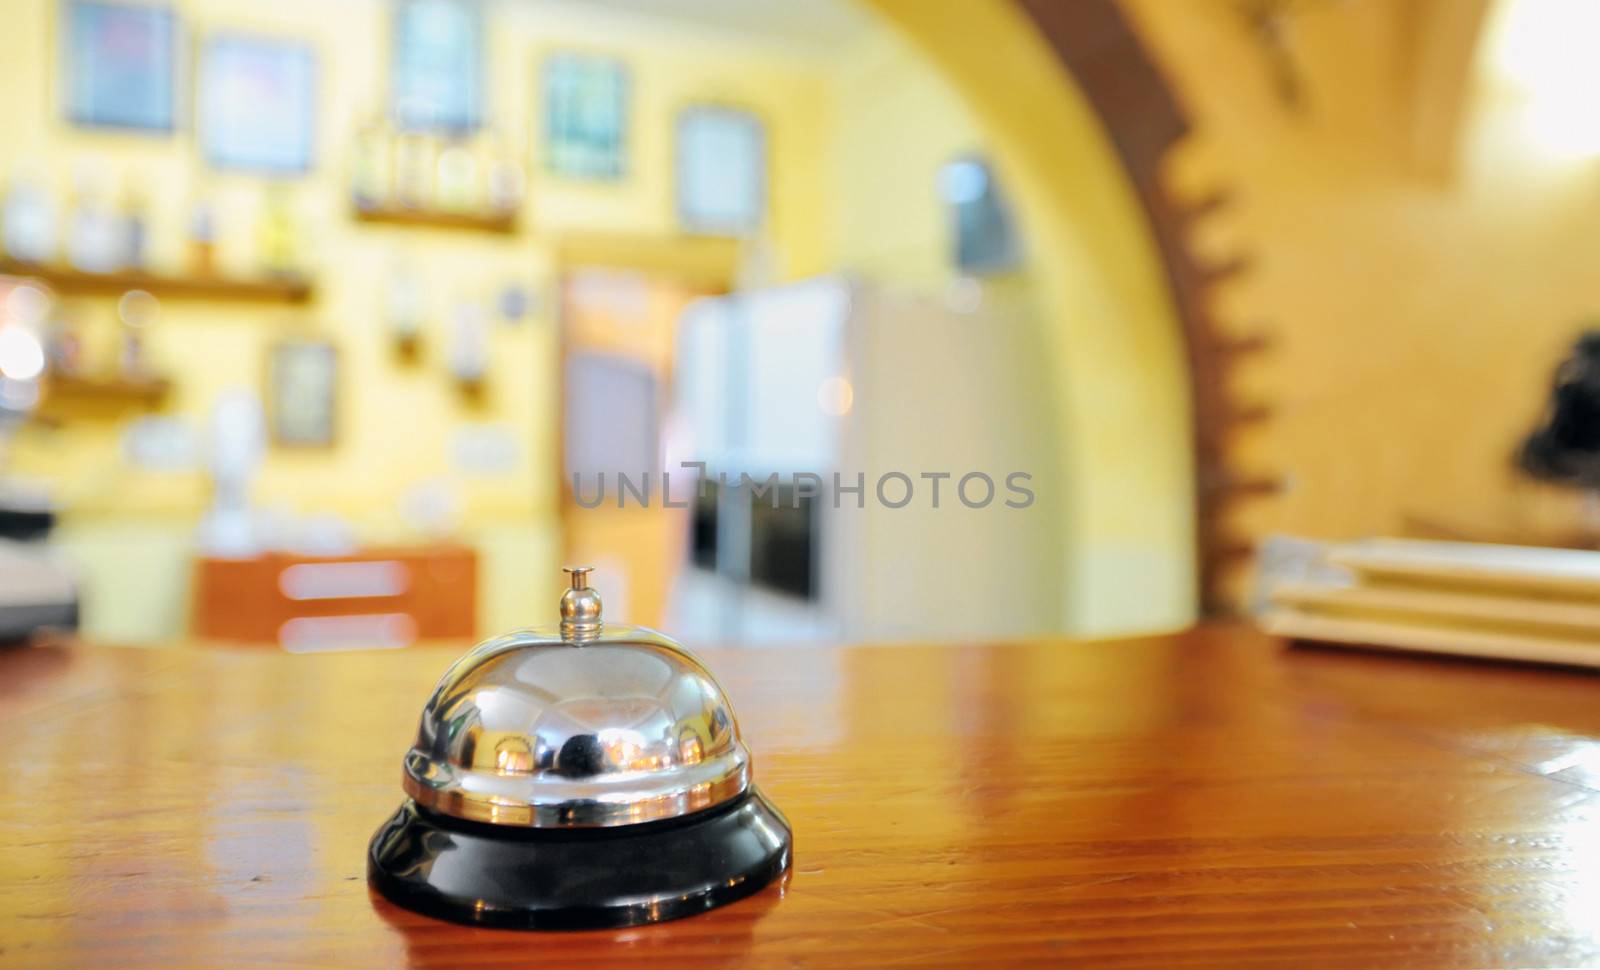 service bell at the hotel reception